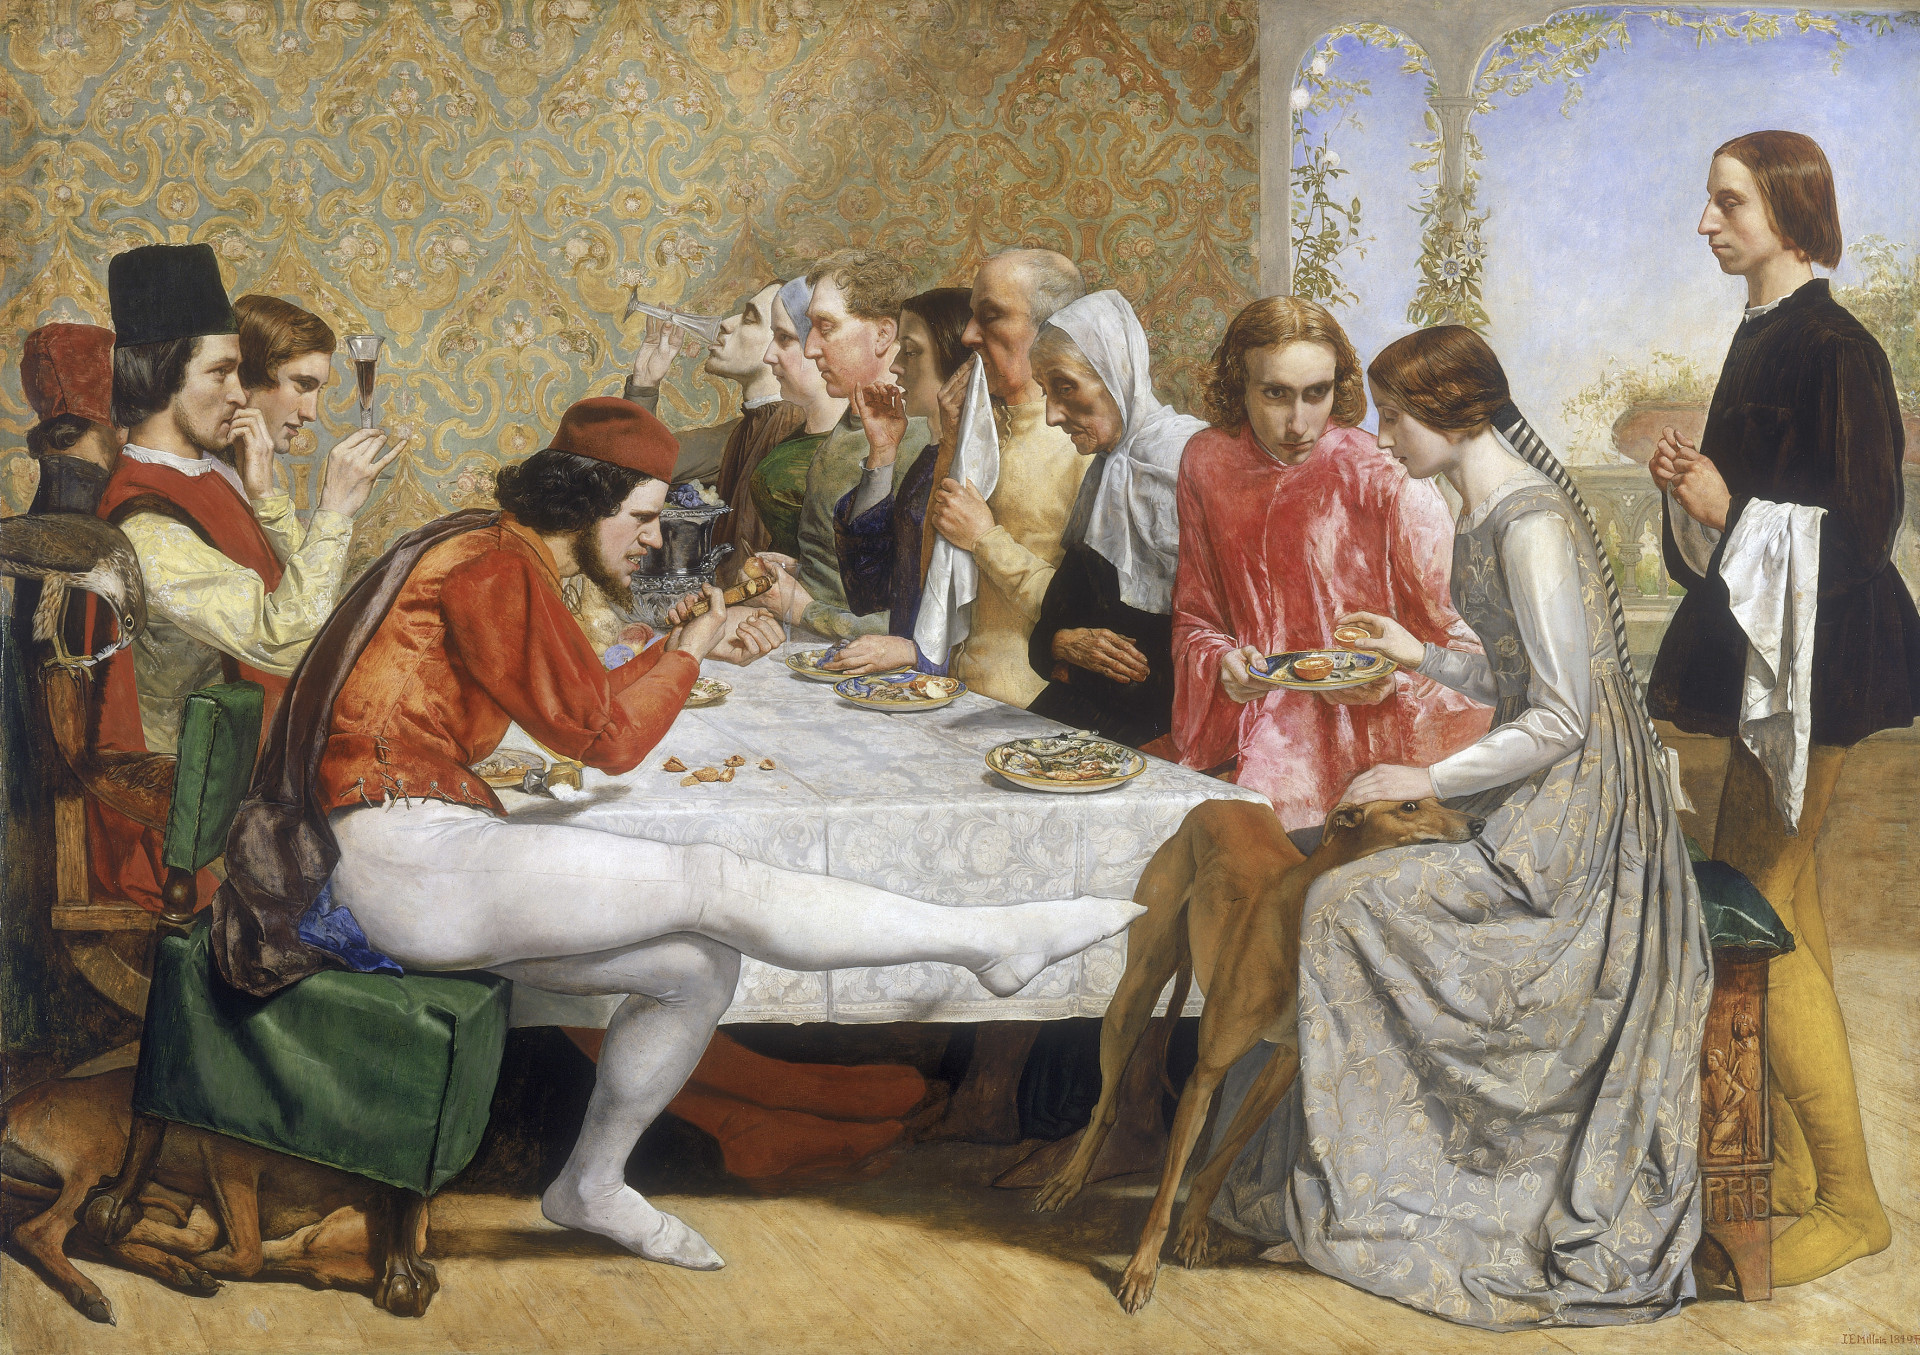 <p>According to The Independent, recent studies of John Everett Millais' painting 'Isabella' have revealed hidden phallic symbols. The character in the foreground, wearing white tights, appears to be concealing an erection.</p><p>You may also like:<a href="https://www.starsinsider.com/n/261507?utm_source=msn.com&utm_medium=display&utm_campaign=referral_description&utm_content=622678v1en-en"> Are you a Virgo? These celebs share your star sign</a></p>